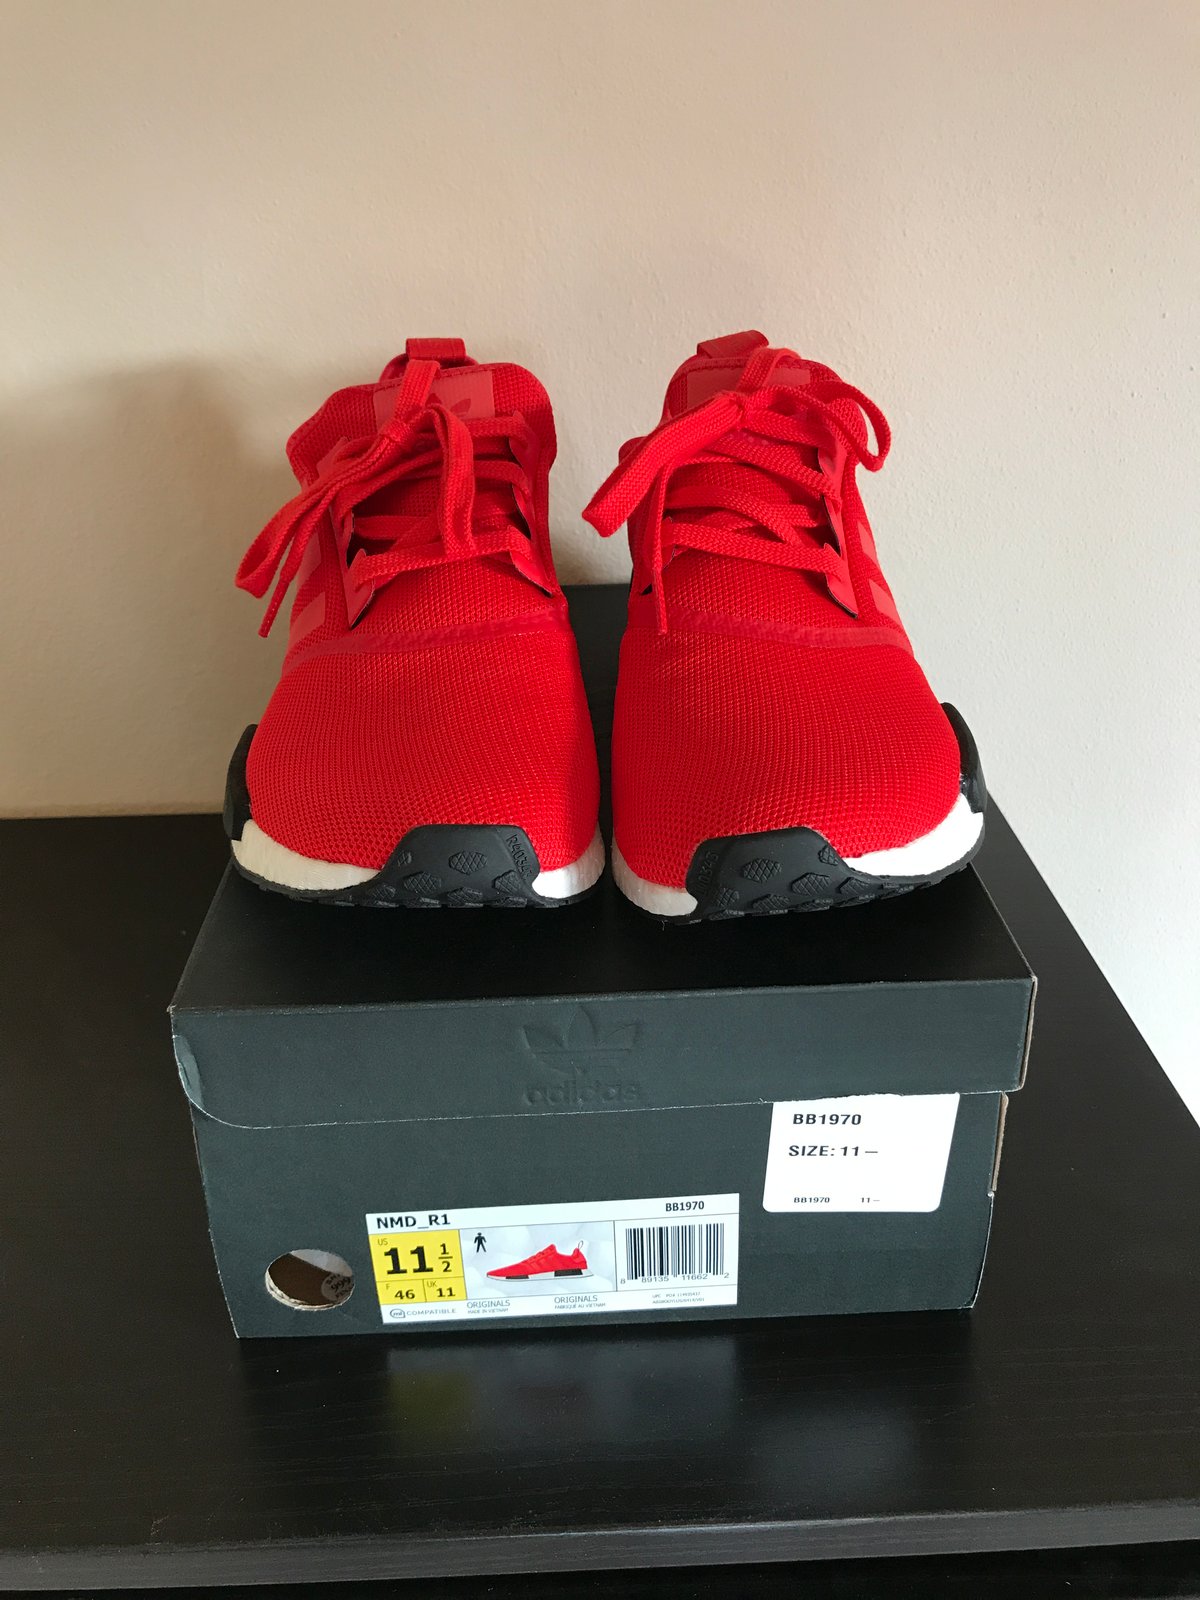 Adidas NMD R1 clear red | KnowSneaks